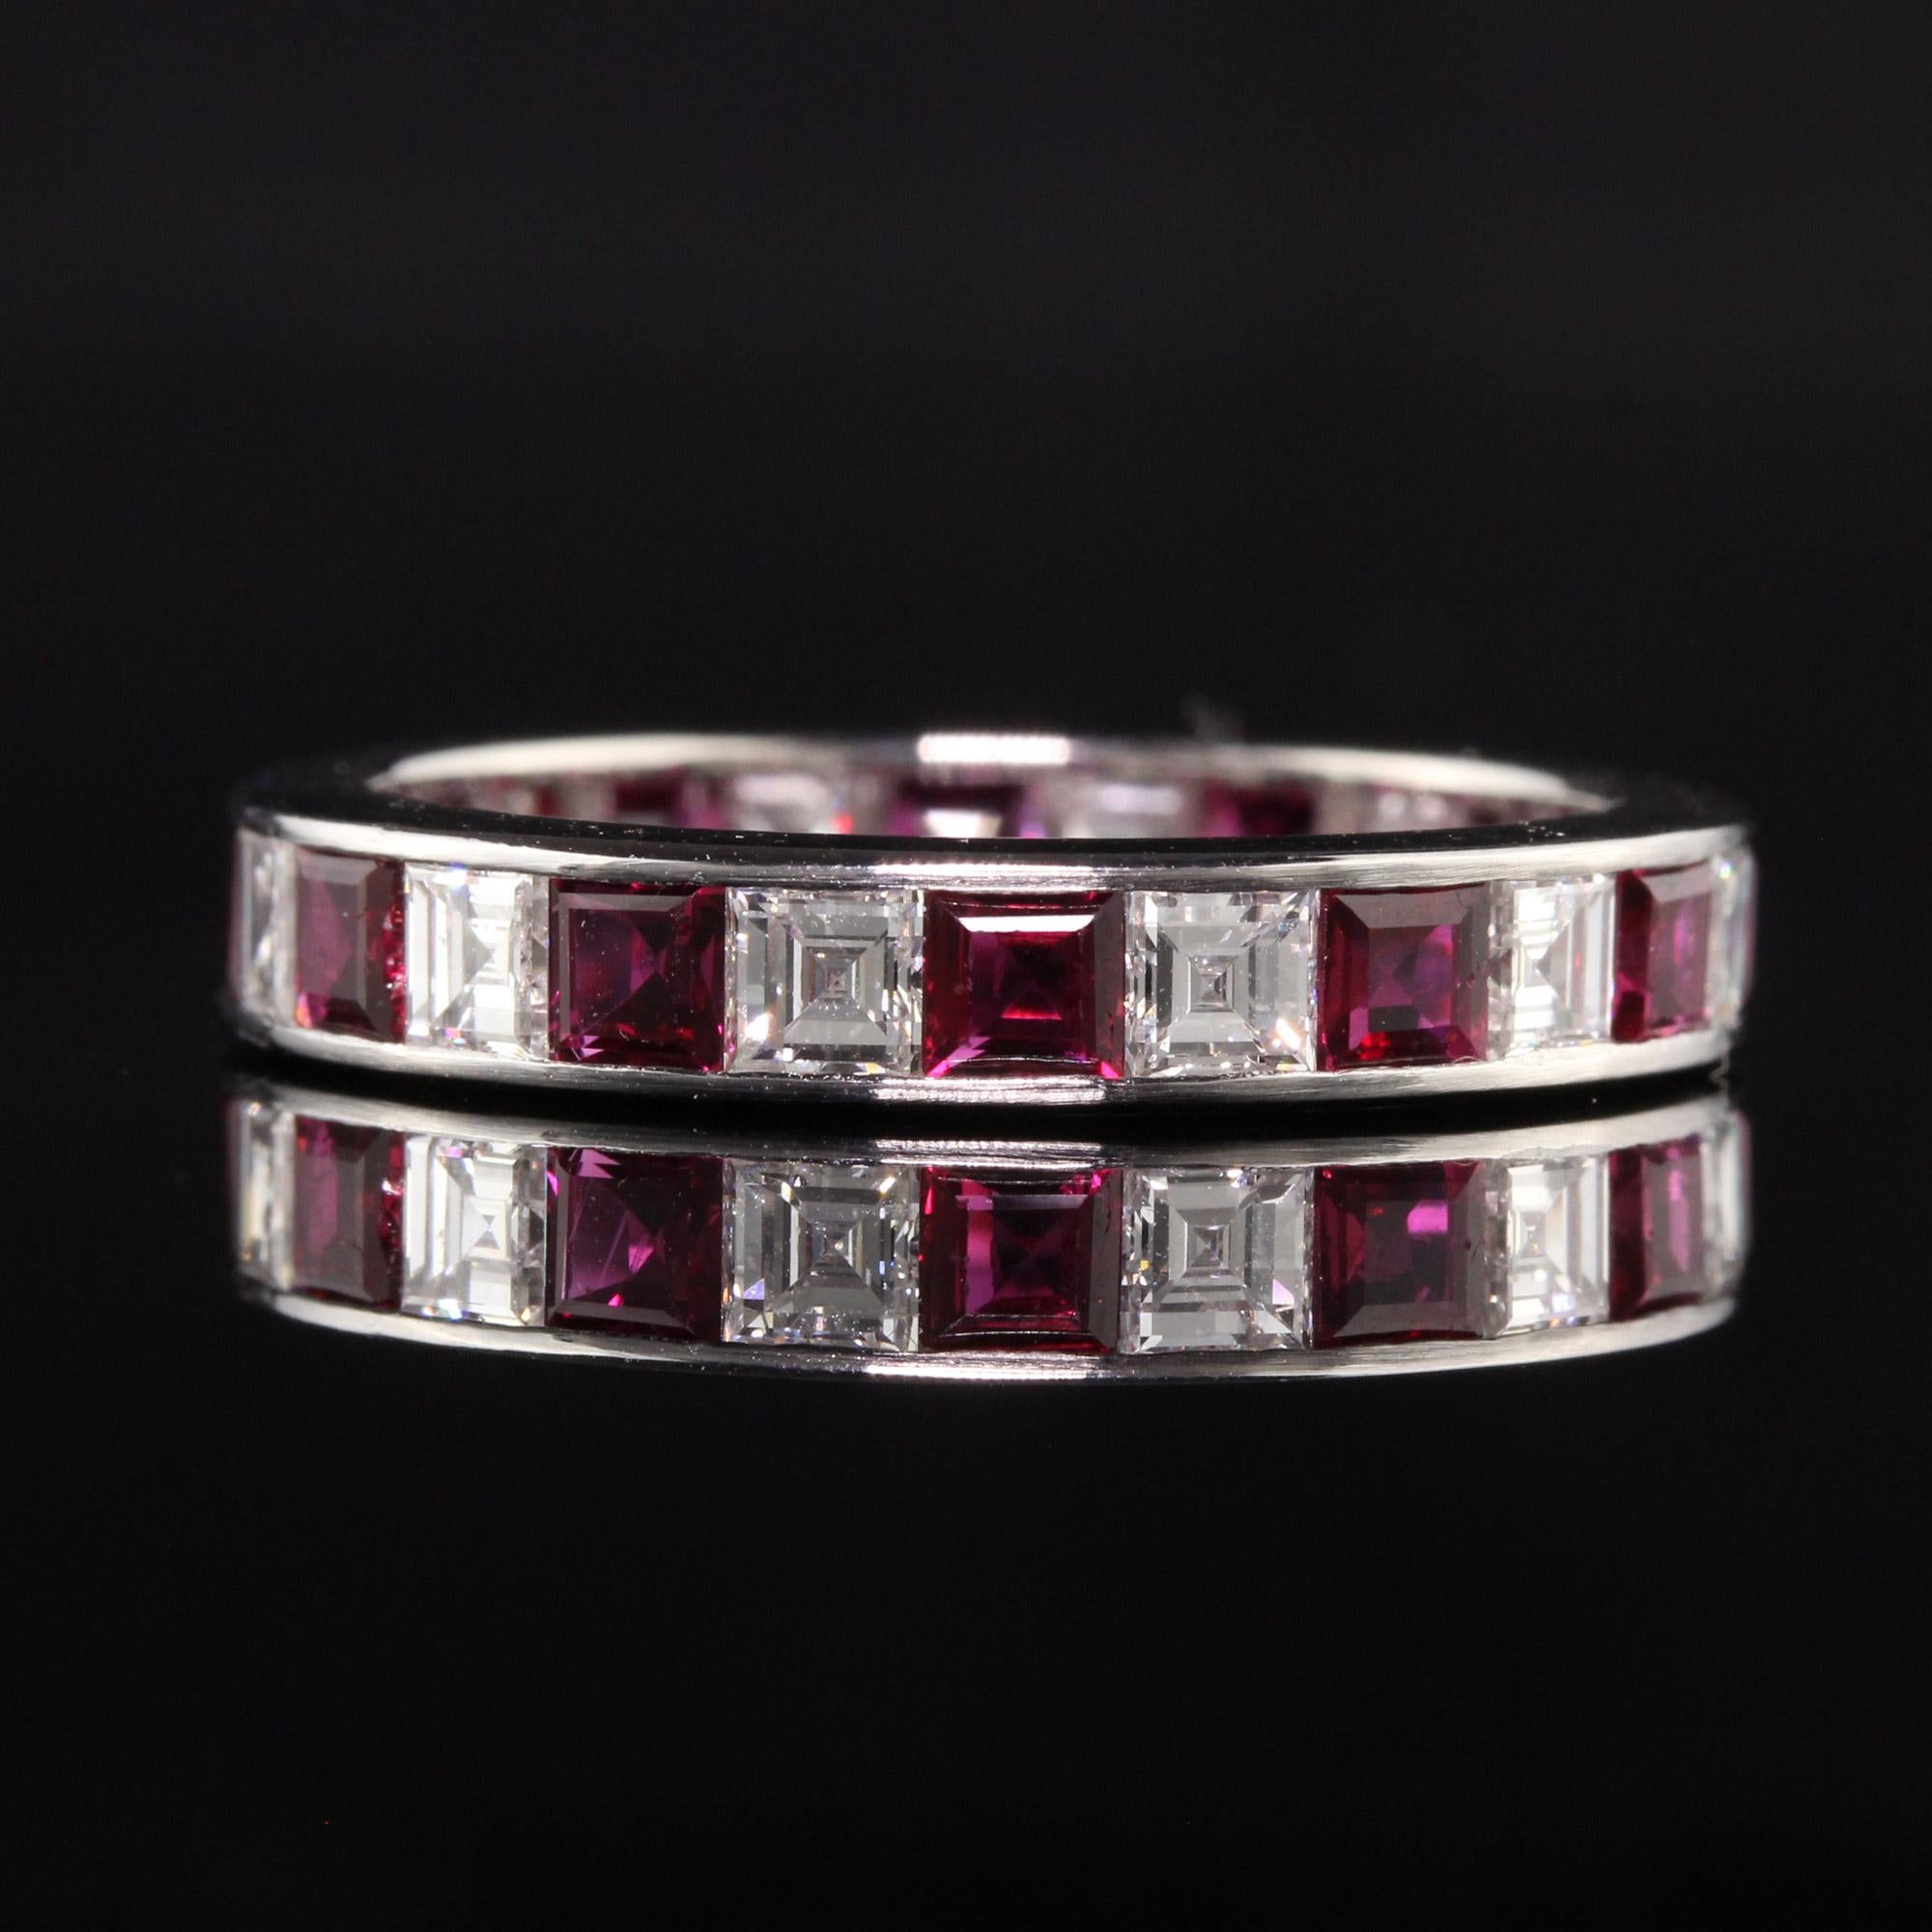 Antique Art Deco Platinum Carre Cut Diamond and Ruby Eternity Band In Good Condition For Sale In Great Neck, NY